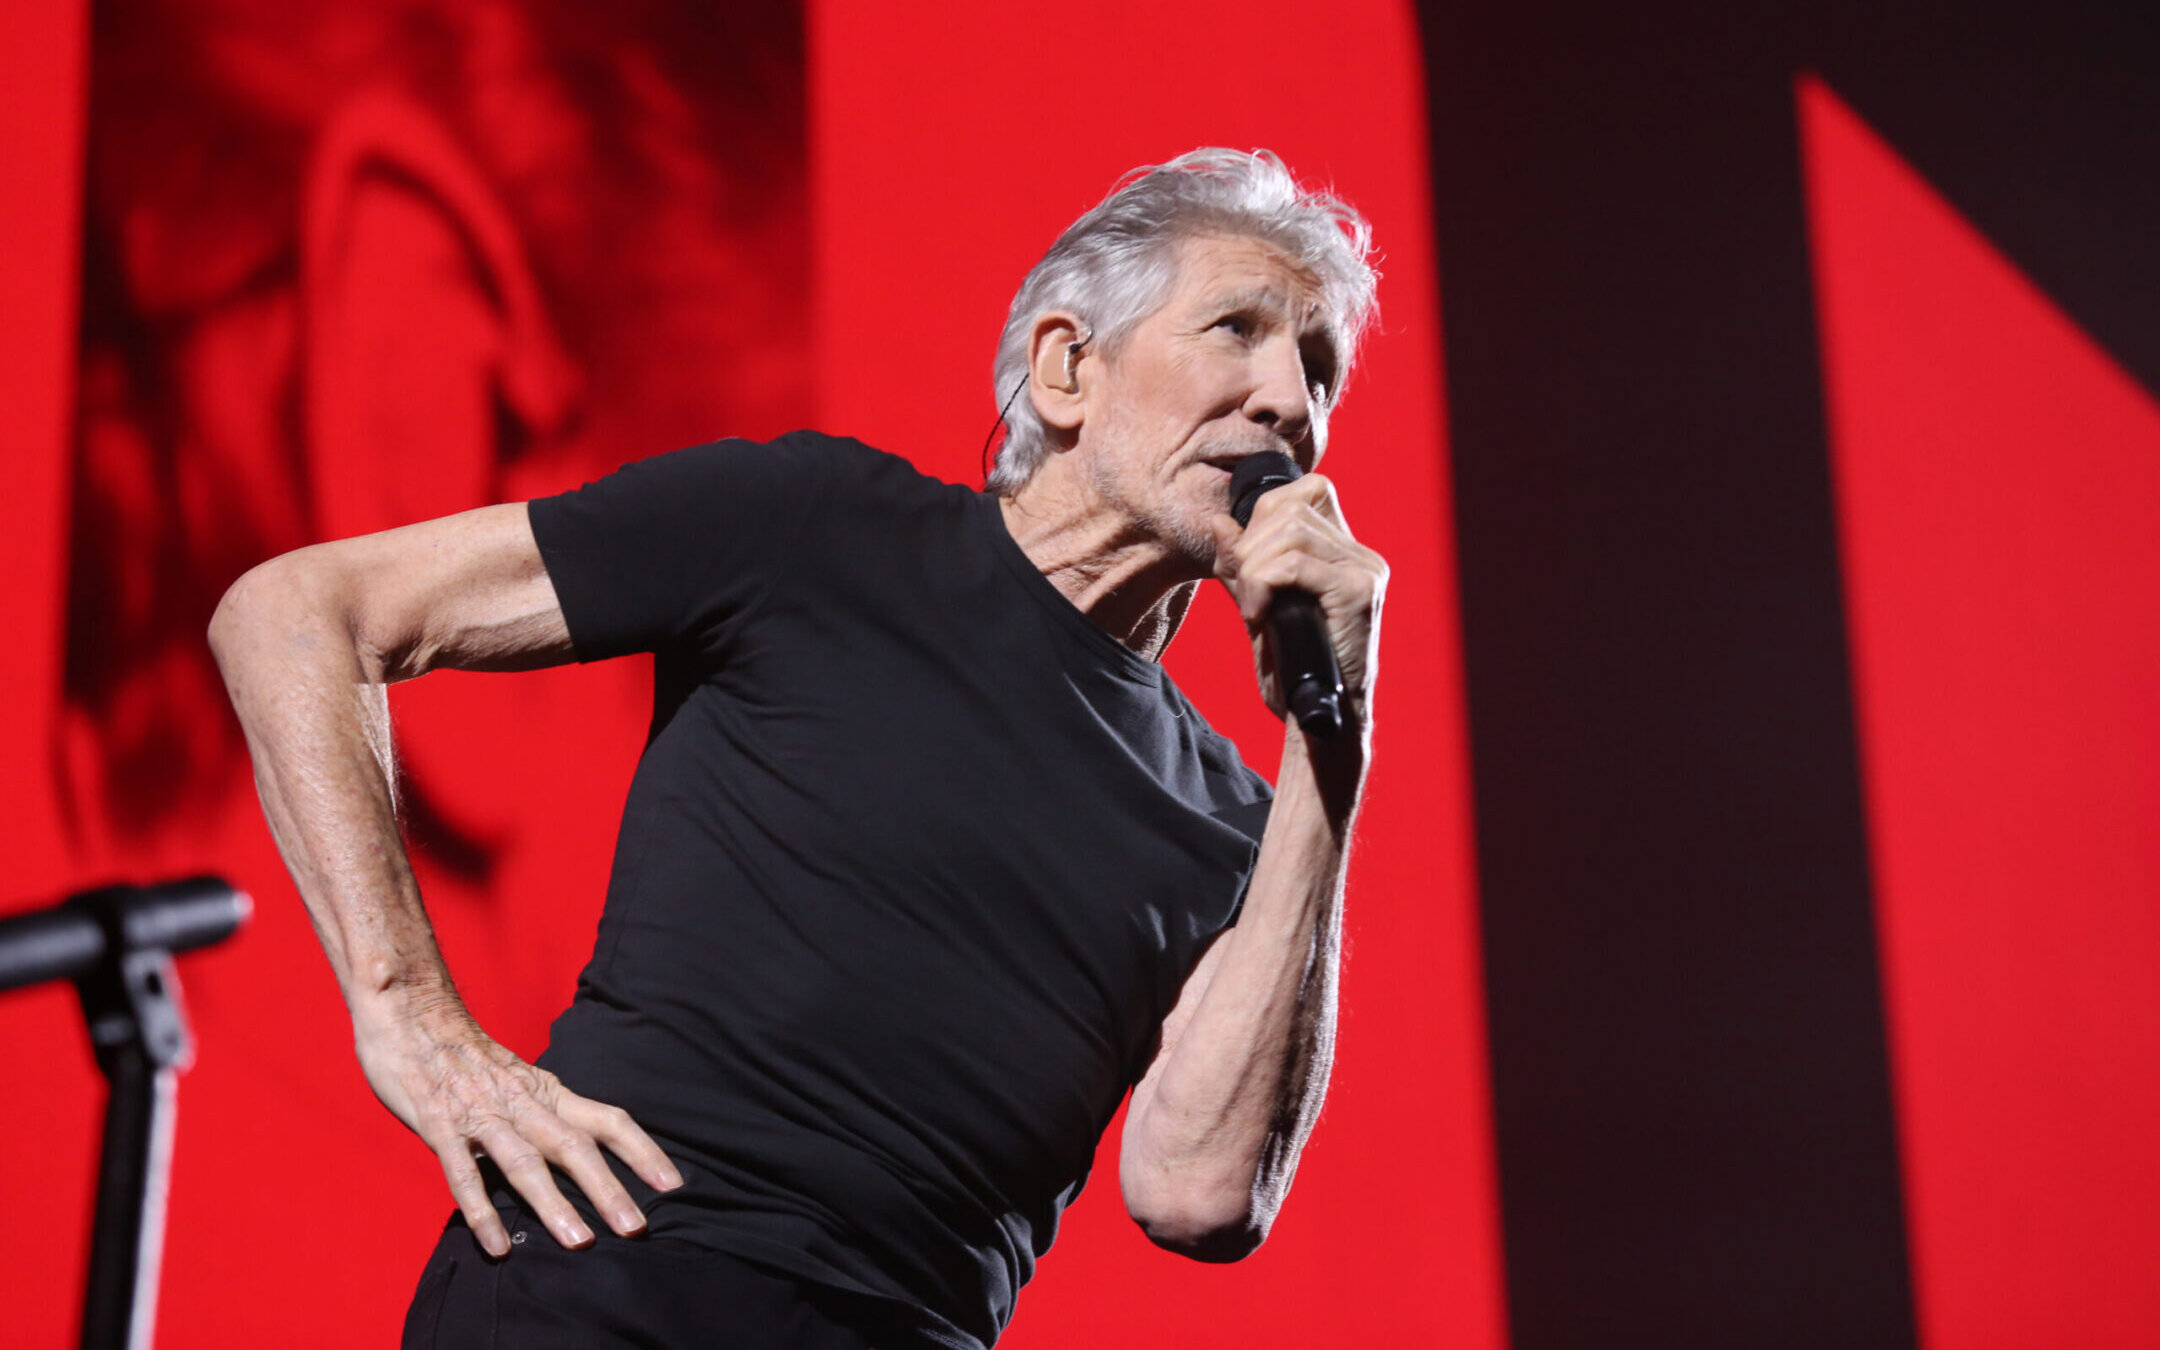 Roger Waters performing during a concert as part of the ‘This Is Not A Drill Tour’ in Monterrey, Mexico, Oct. 11, 2022. (Medios y Media/Getty Images)